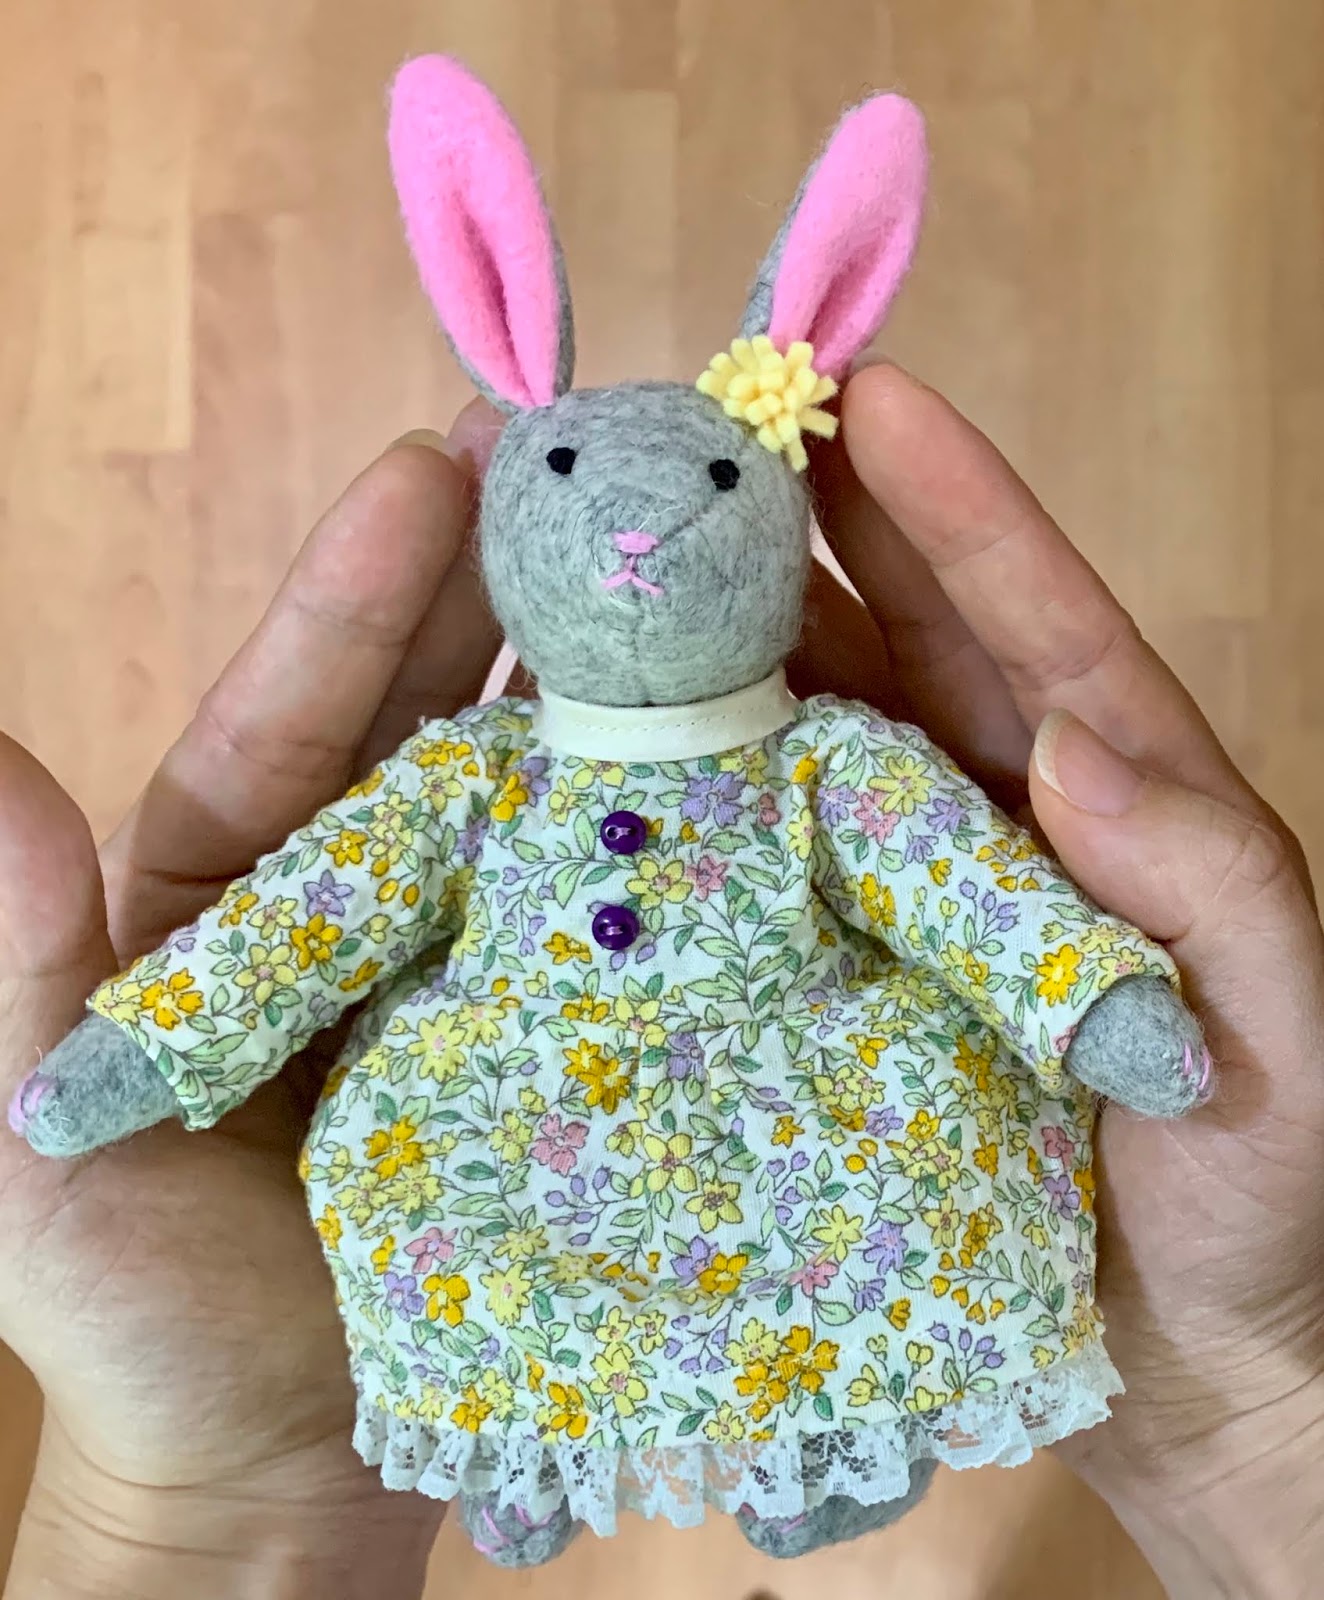 How To Sew Little Felt Animals by Sue Quinn – Craft Book Review – Tin Teddy